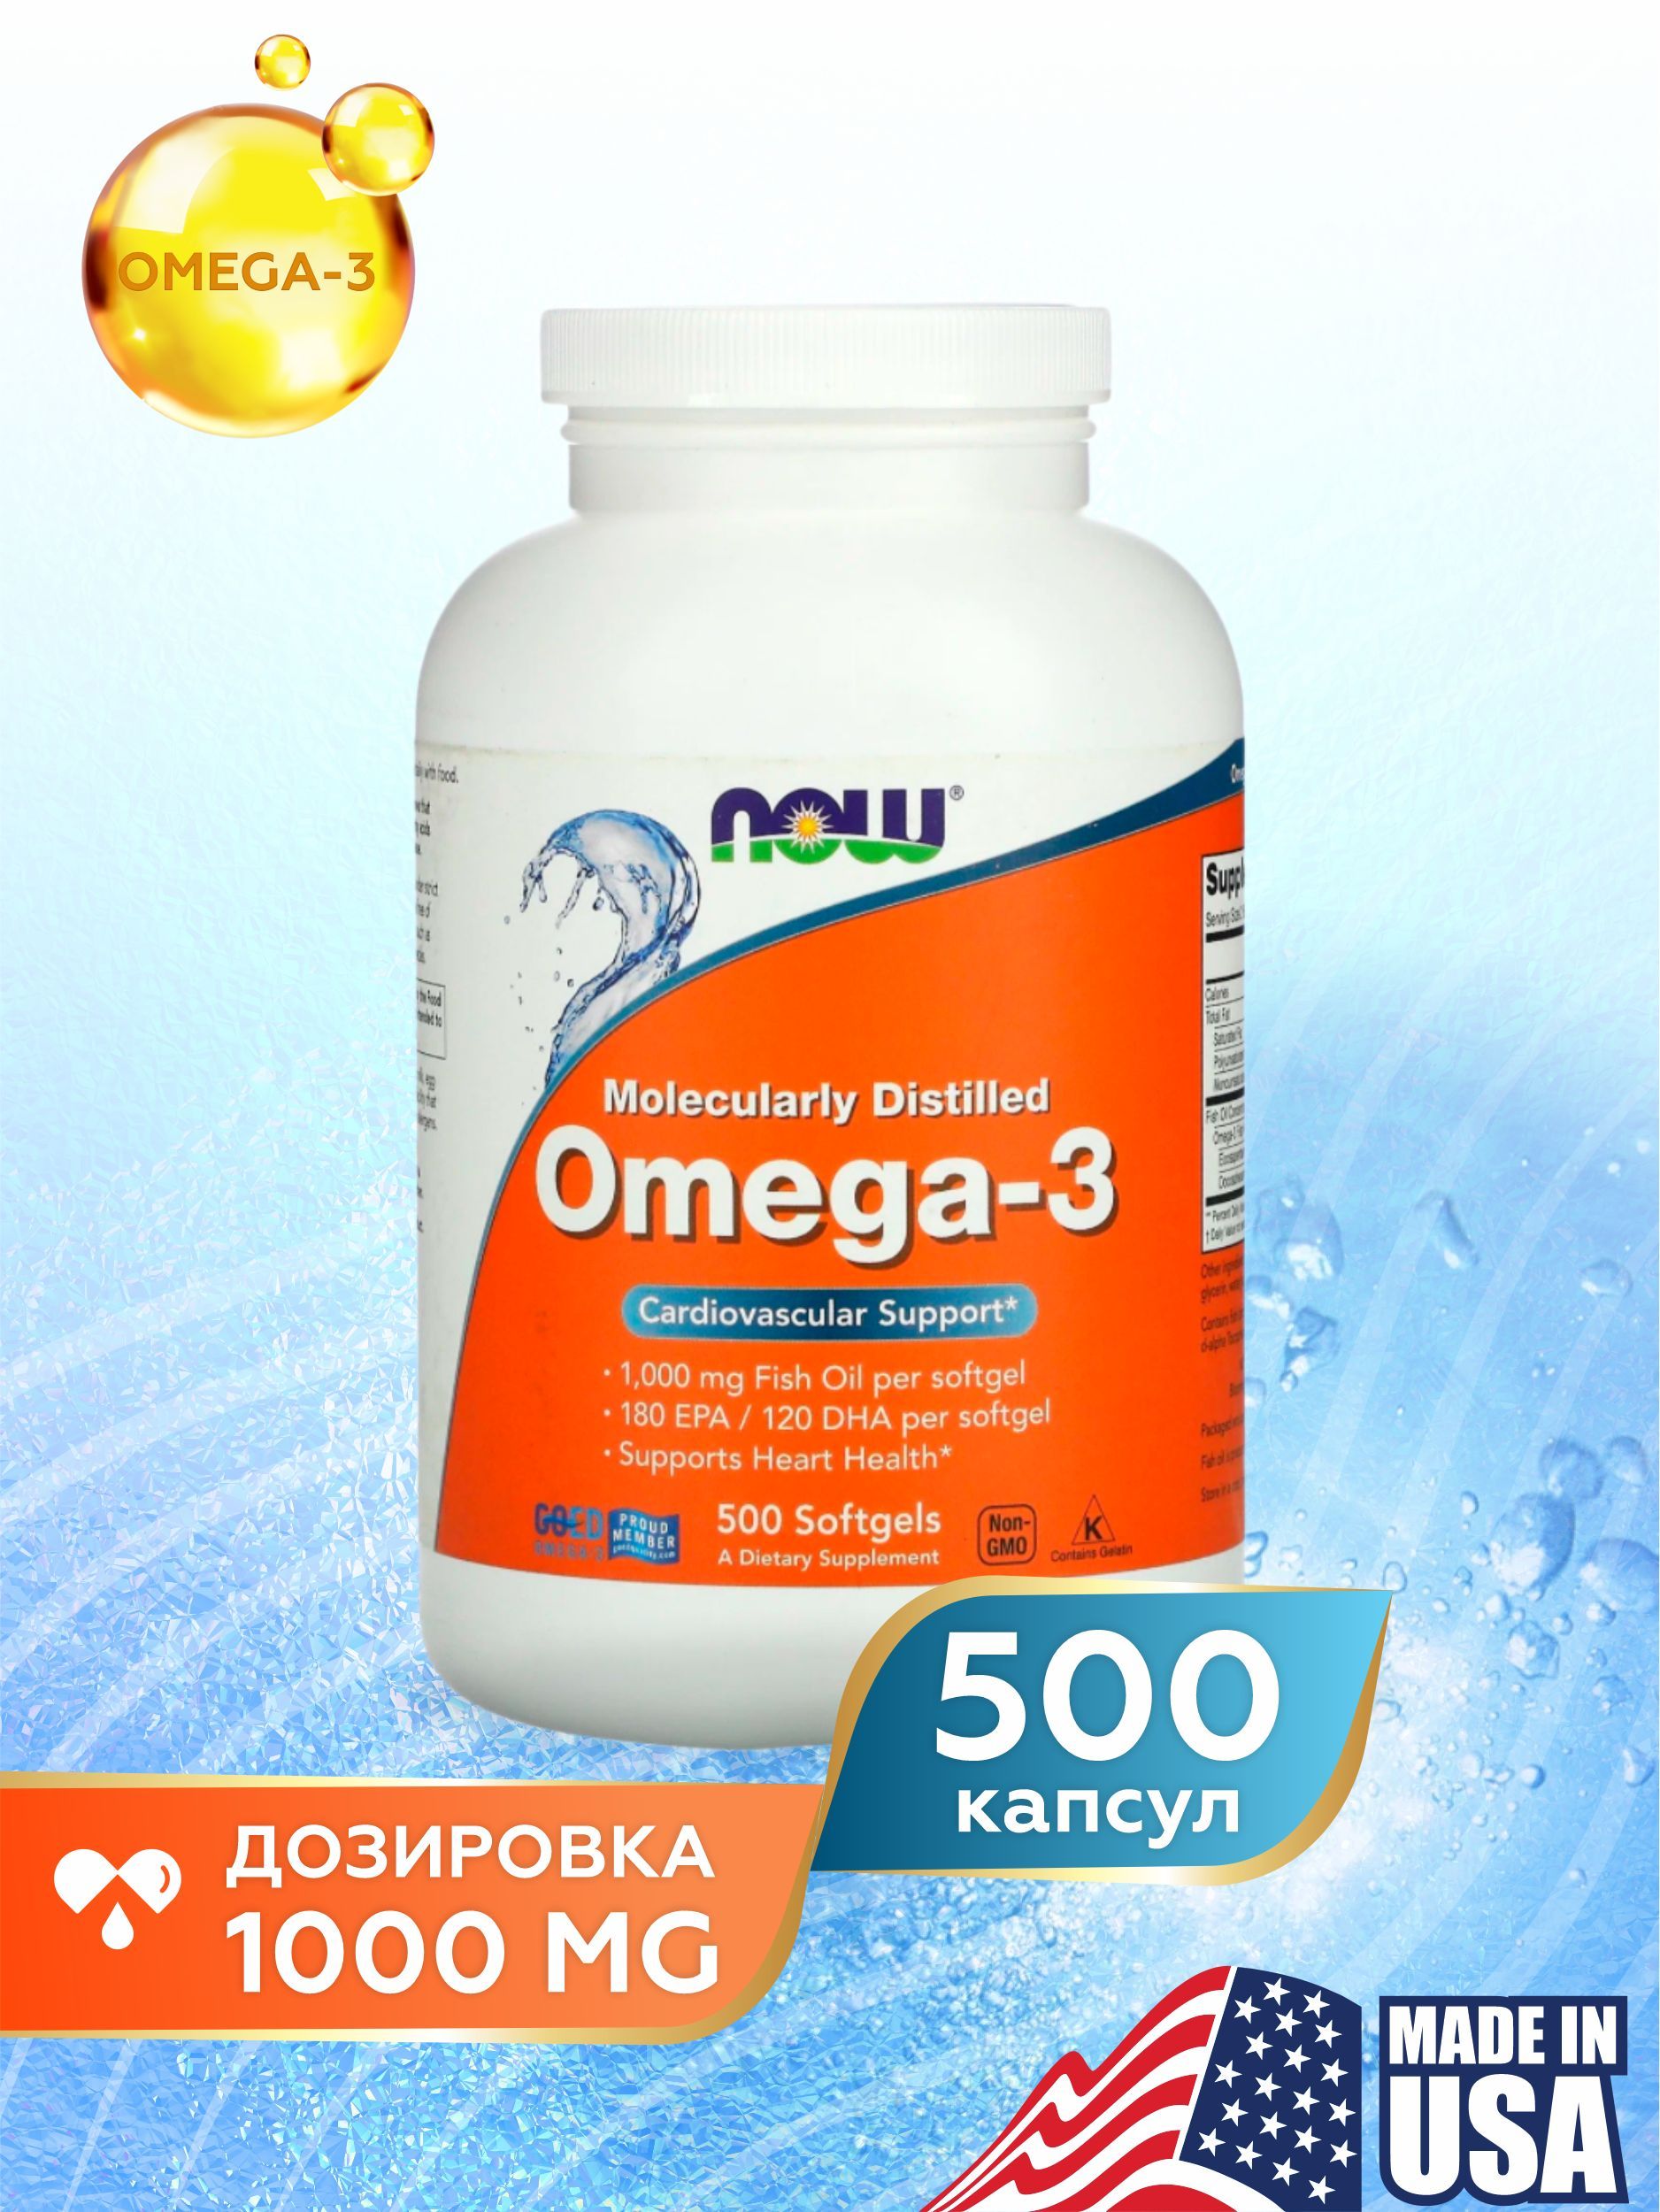 Ultra omega 3 капсулы now. Now Omega 3 500. Омега 3 Now 500 Softgels. Now Omega-3 (500 капсул). Now Омега 3 1000 мг.